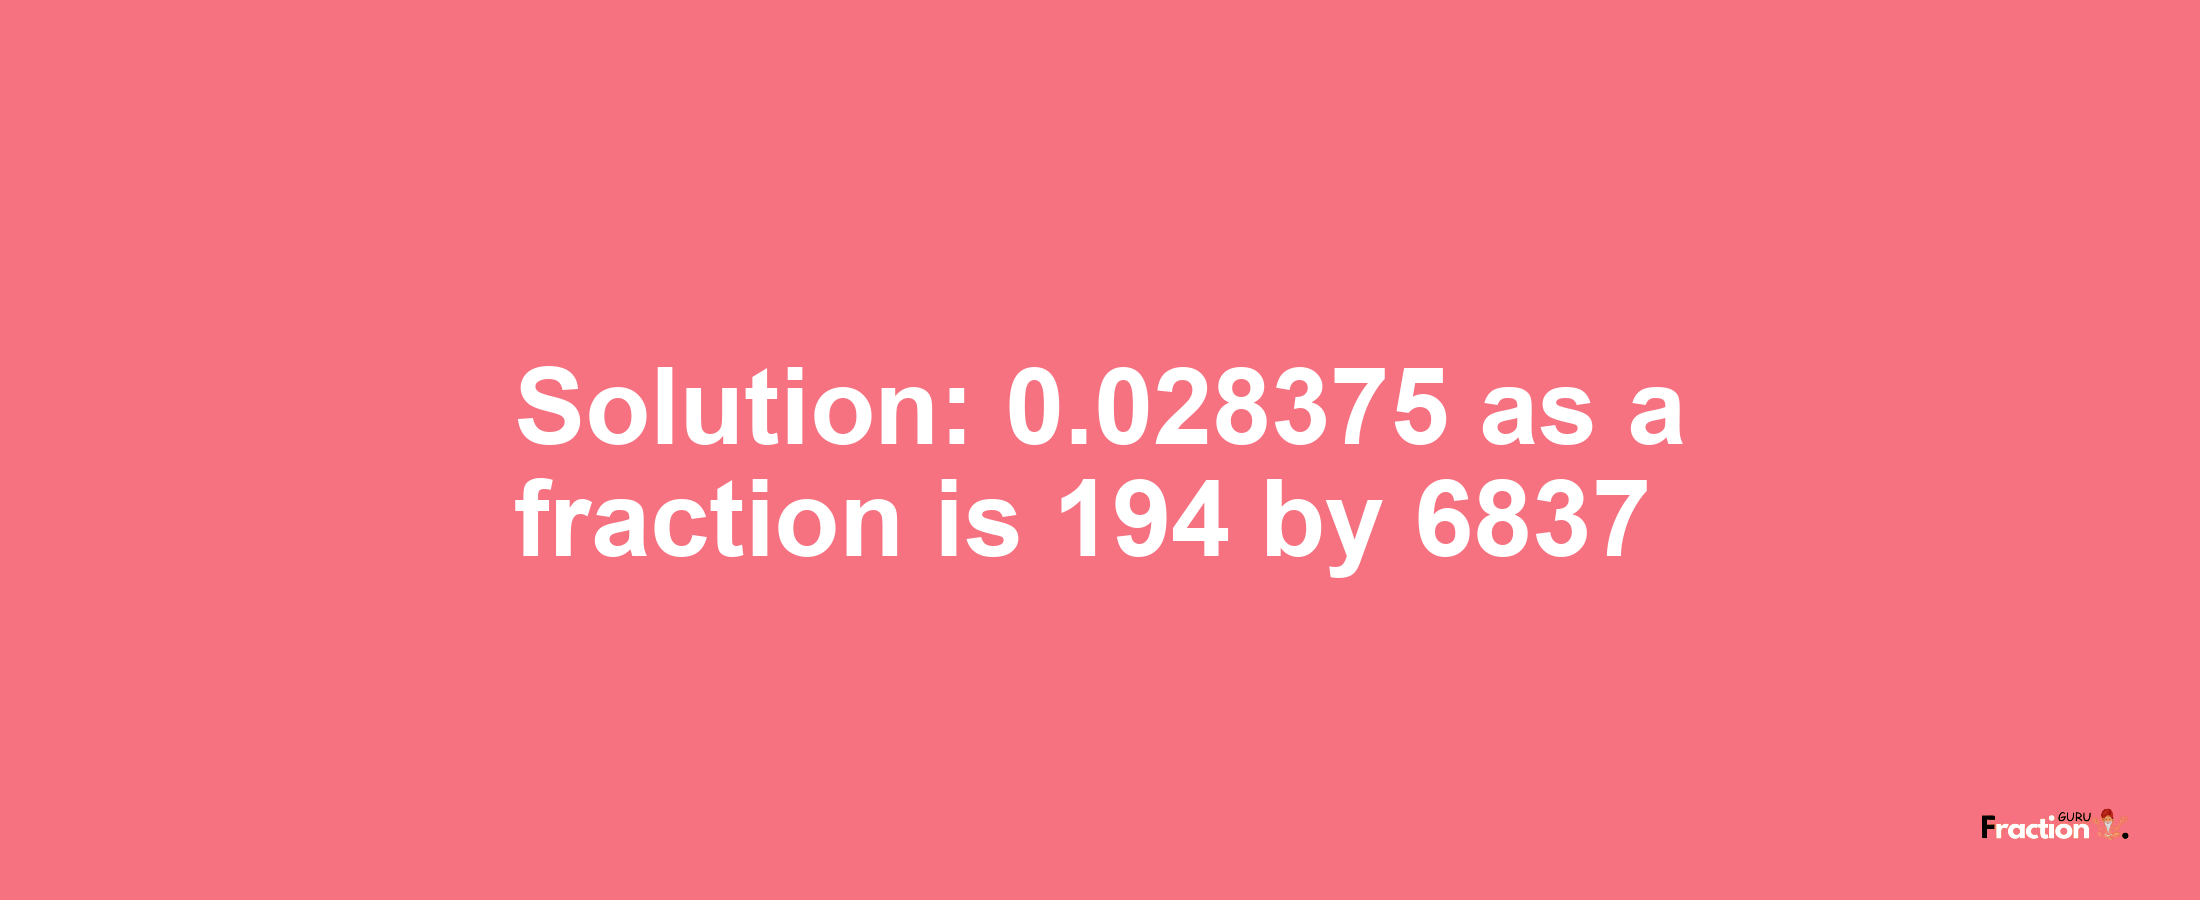 Solution:0.028375 as a fraction is 194/6837